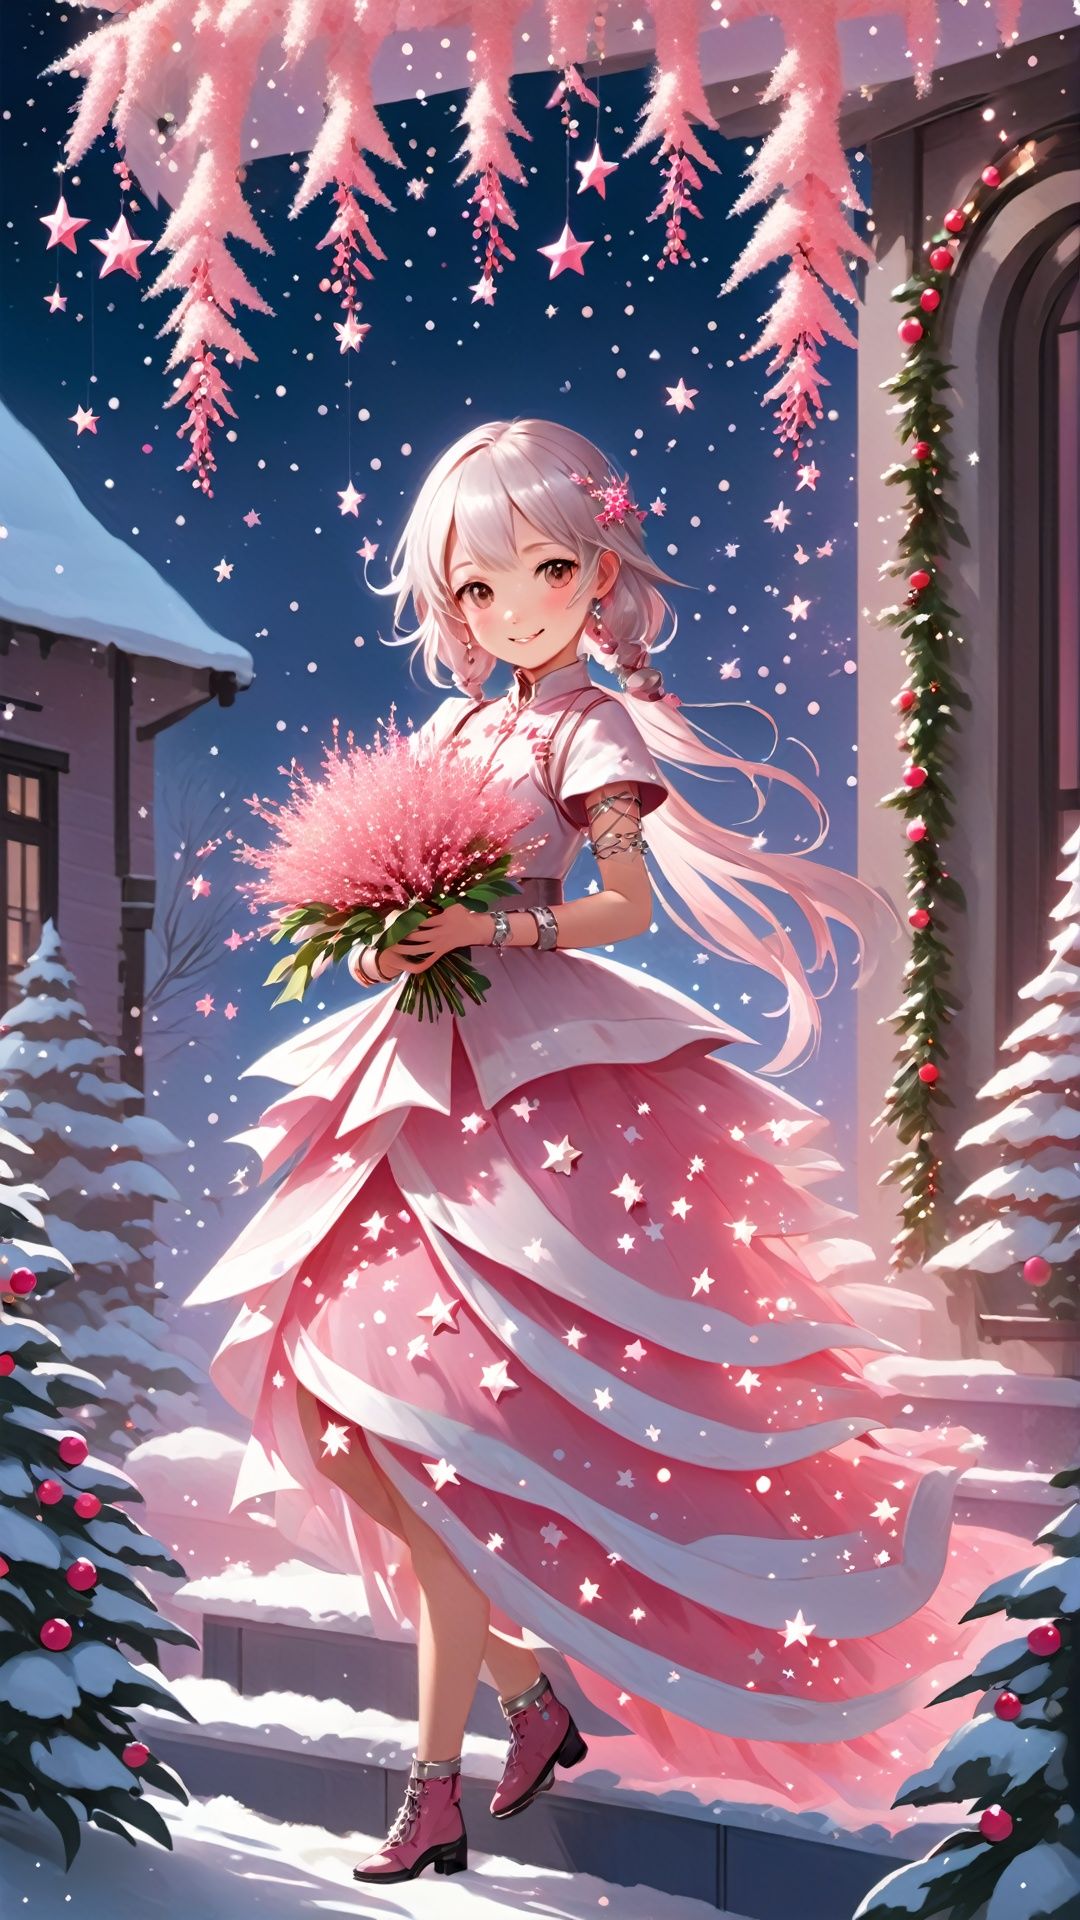 The Christmas girl holds a bouquet of pink snow willow flowers in her hands. The flowers are dotted with small stars and small bells, as if she is a fairy coming out of a fairy tale. Wearing a string of silver bracelets on her wrist, each small pendant represents a warm blessing. She smiled and walked towards the party with light steps. Along the way, she left a string of flashing pink light spots, like a string of small stars behind her.